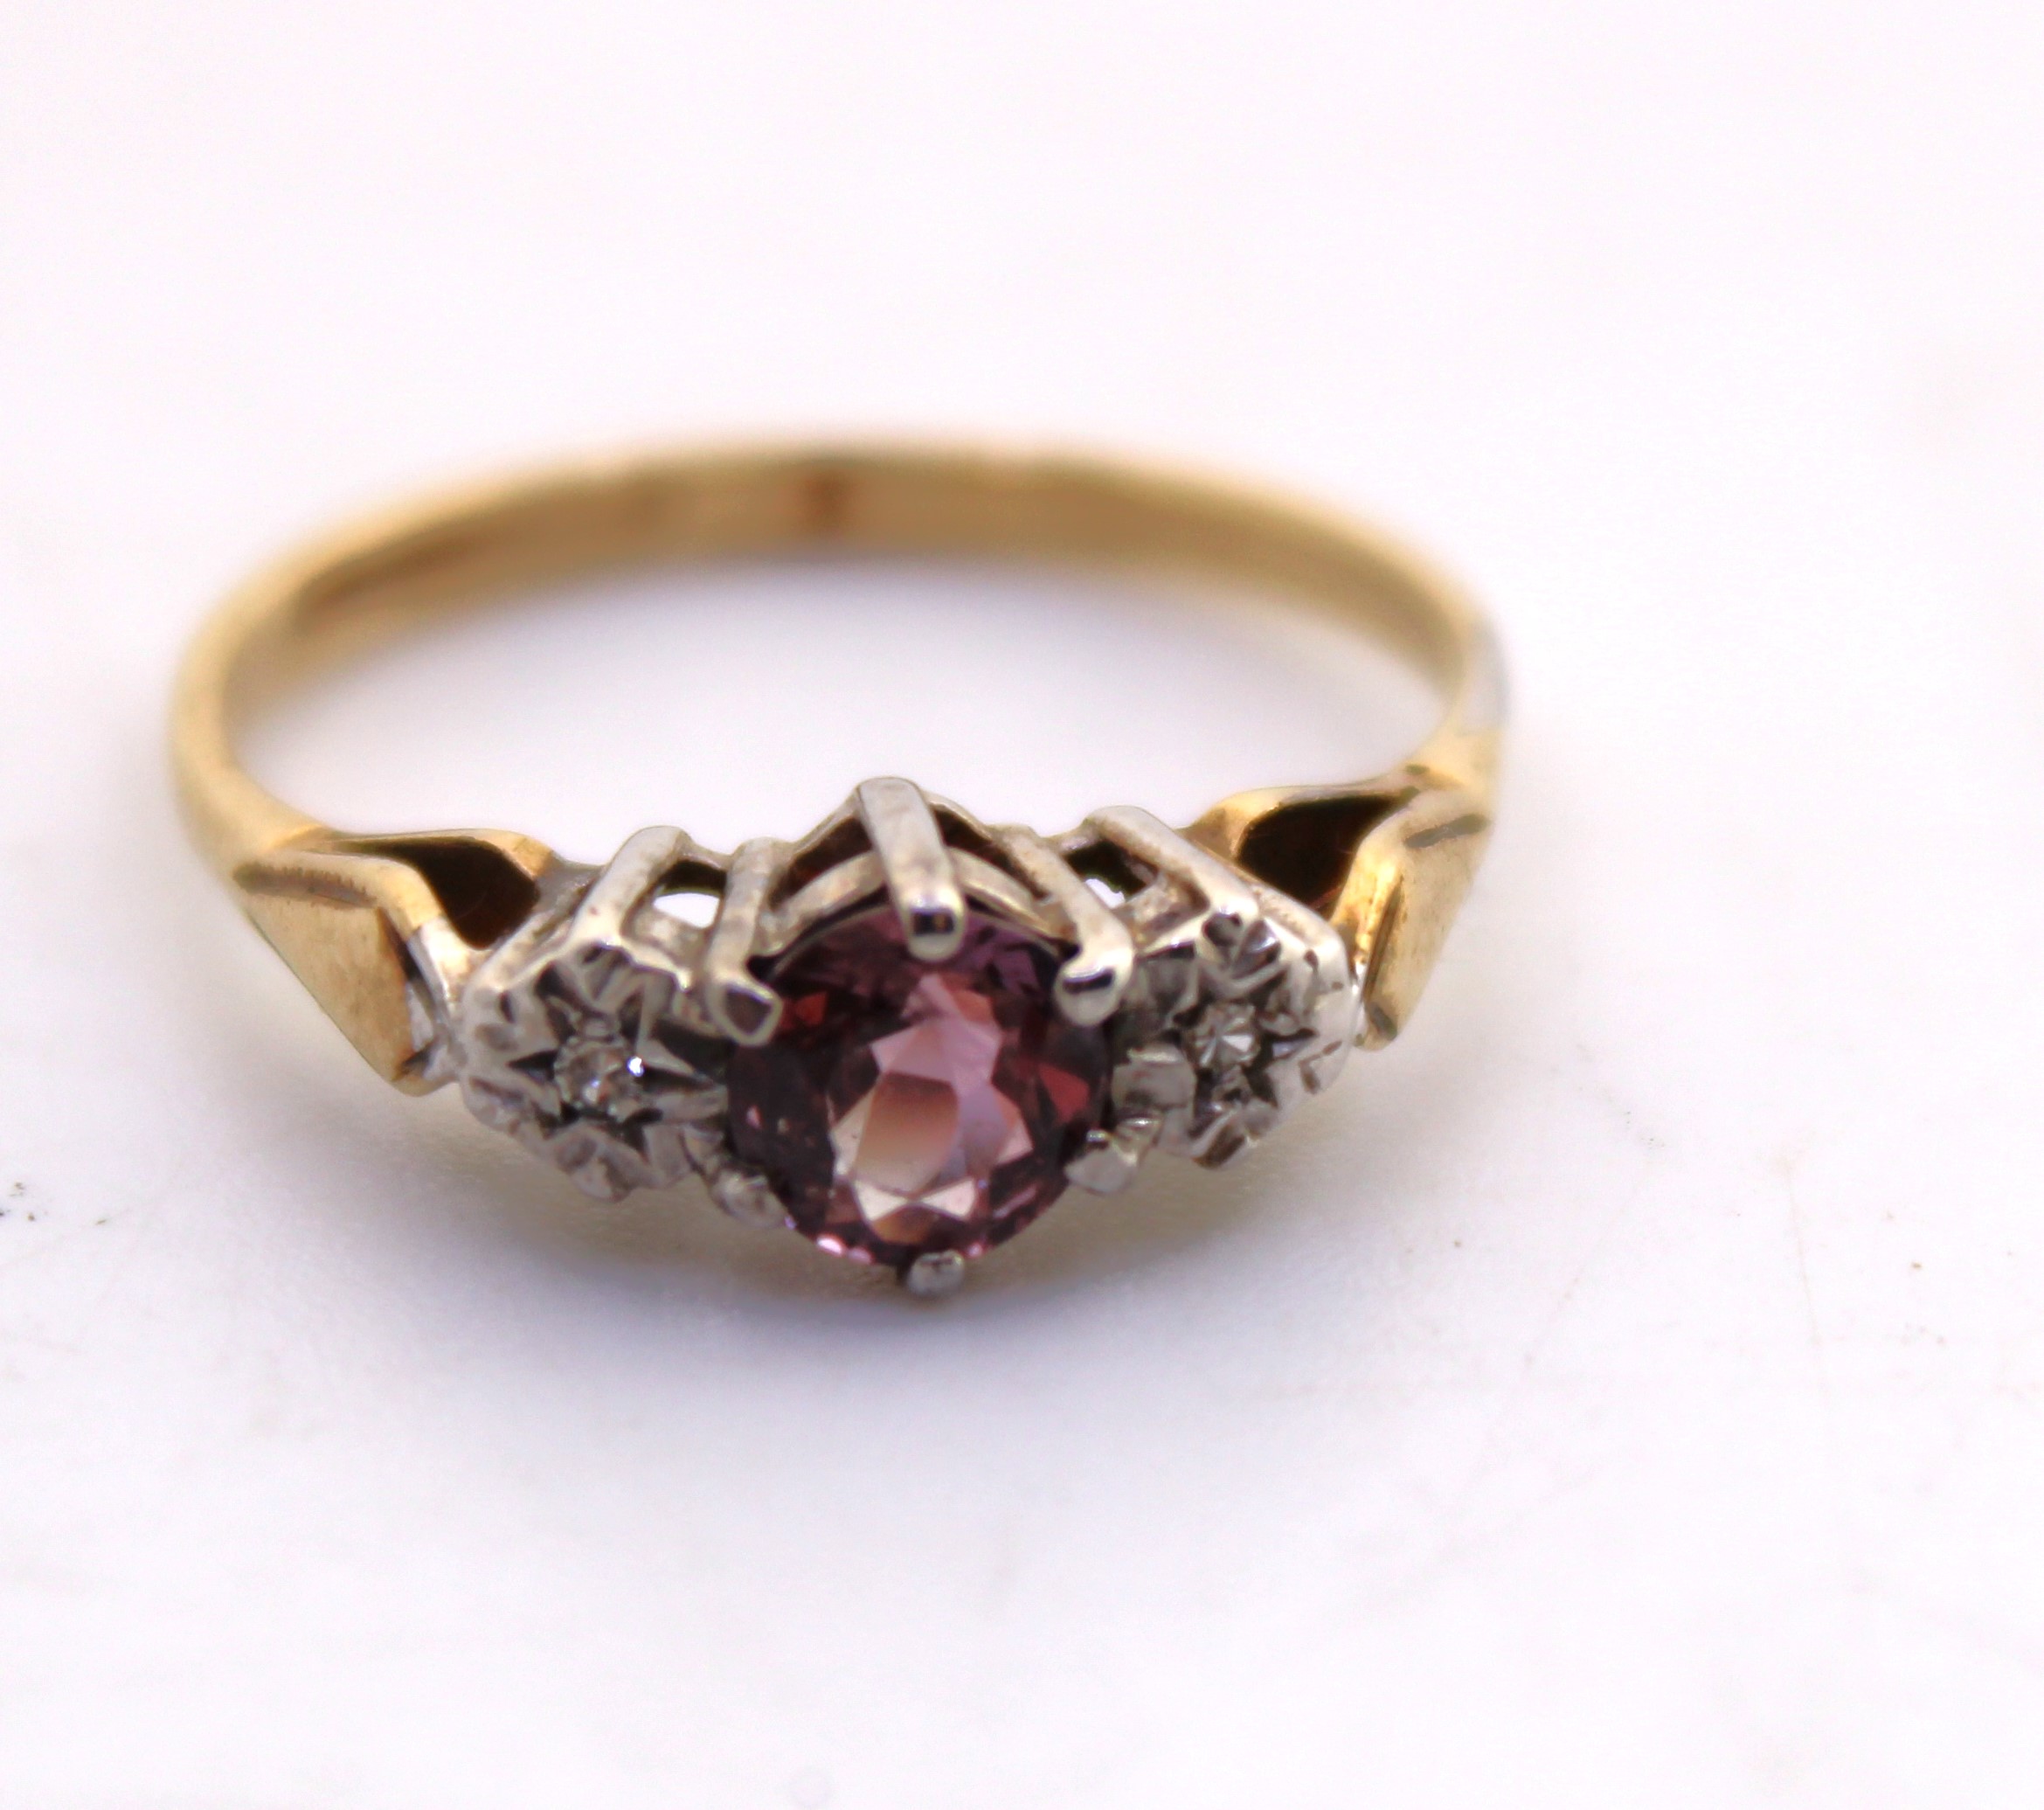 9ct Yellow Gold Round Brilliant Cut Pink Stone and Diamond Ring.  The Centre Pink Stone measures